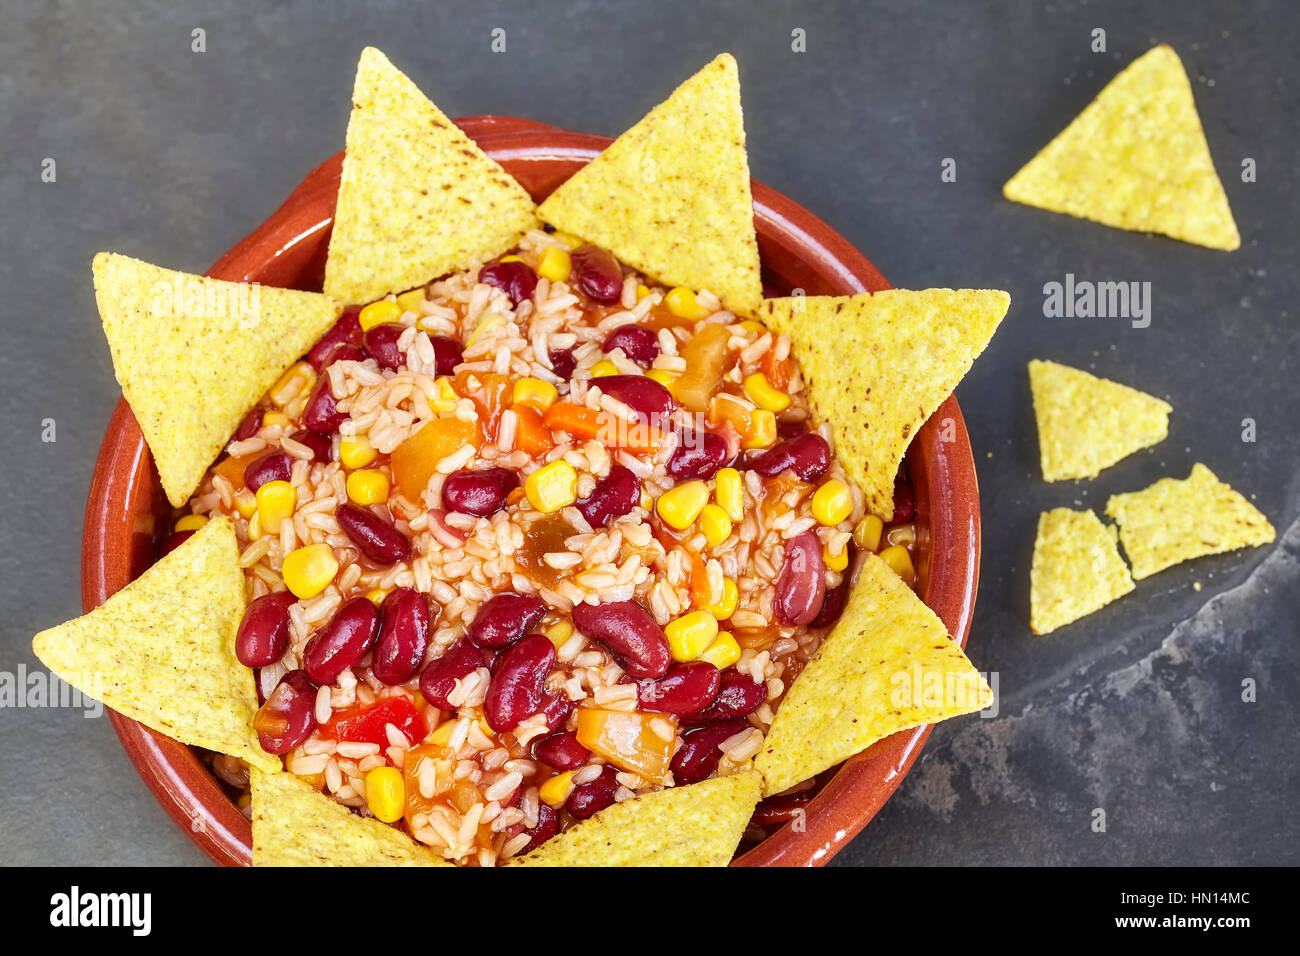 Chili con carne in a bowl with tortilla chips, top view. Stock Photo